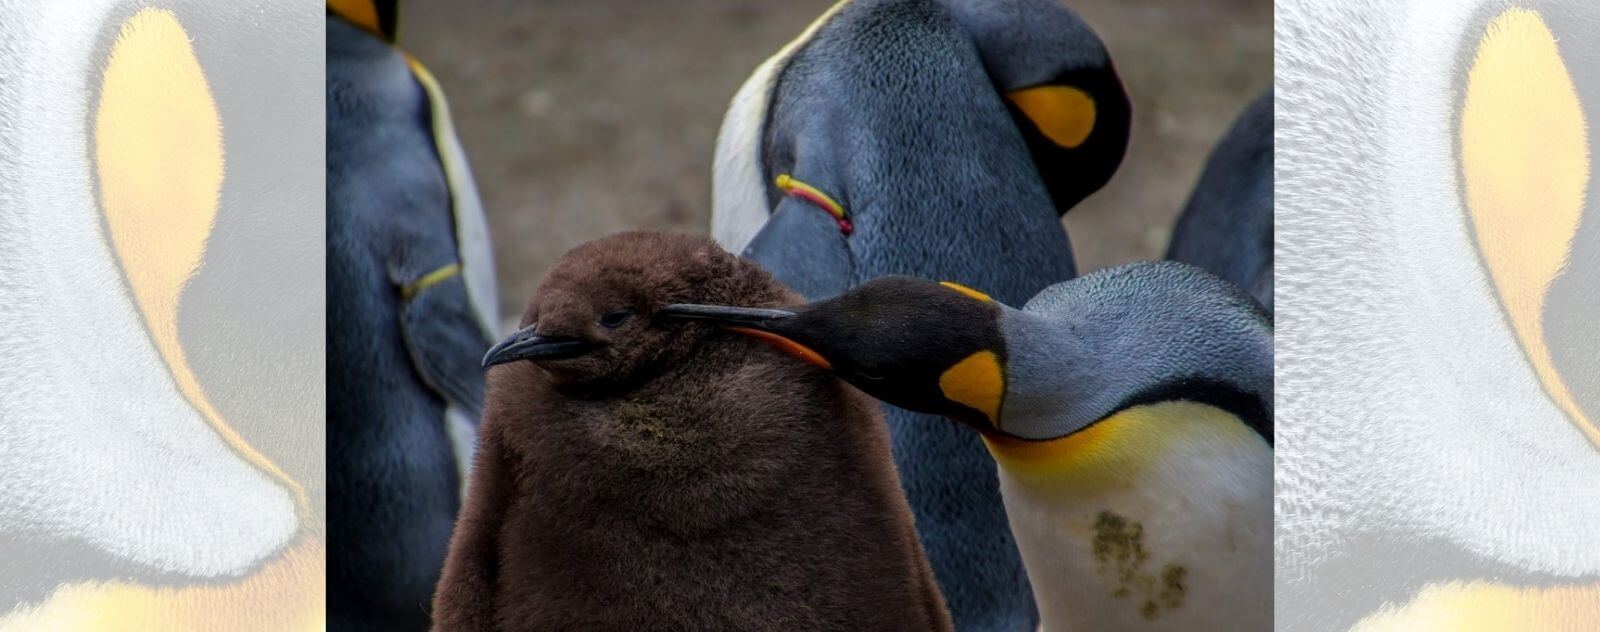 Penguins are Birds and have Black, Grey, Orange and Yellow Feathers